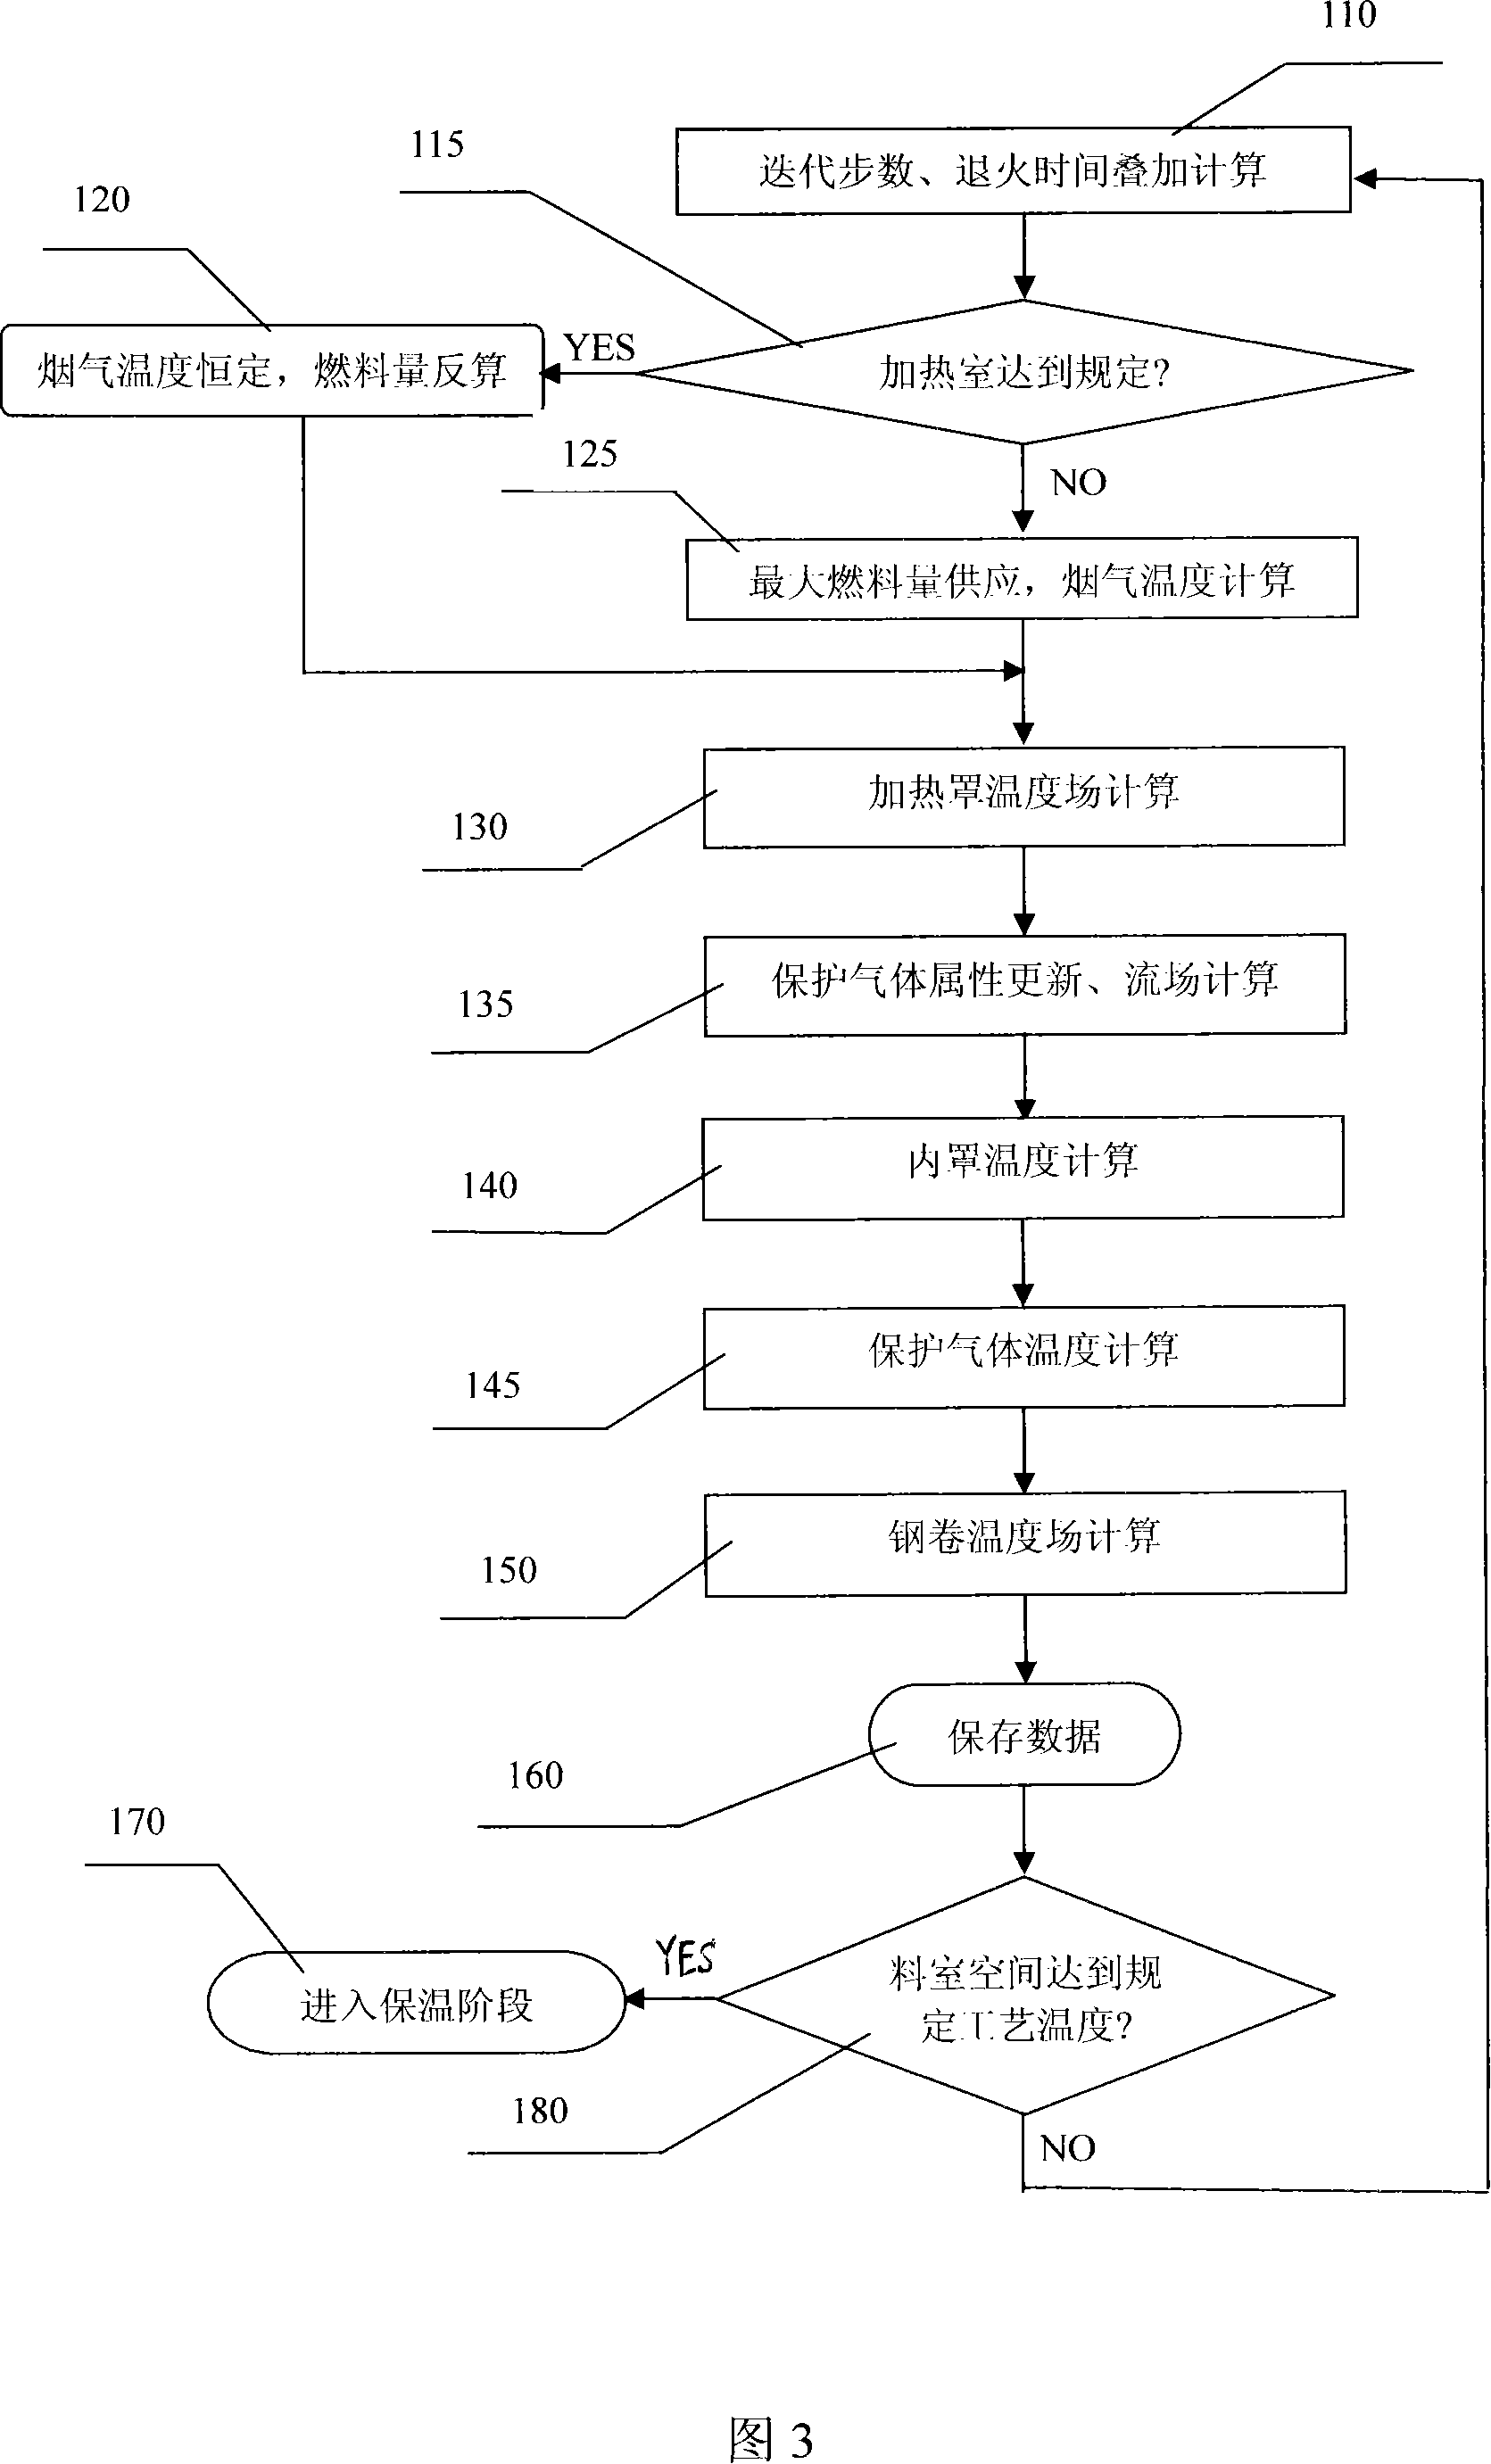 Off-line prediction method for bell-type furnace steel roll annealing process